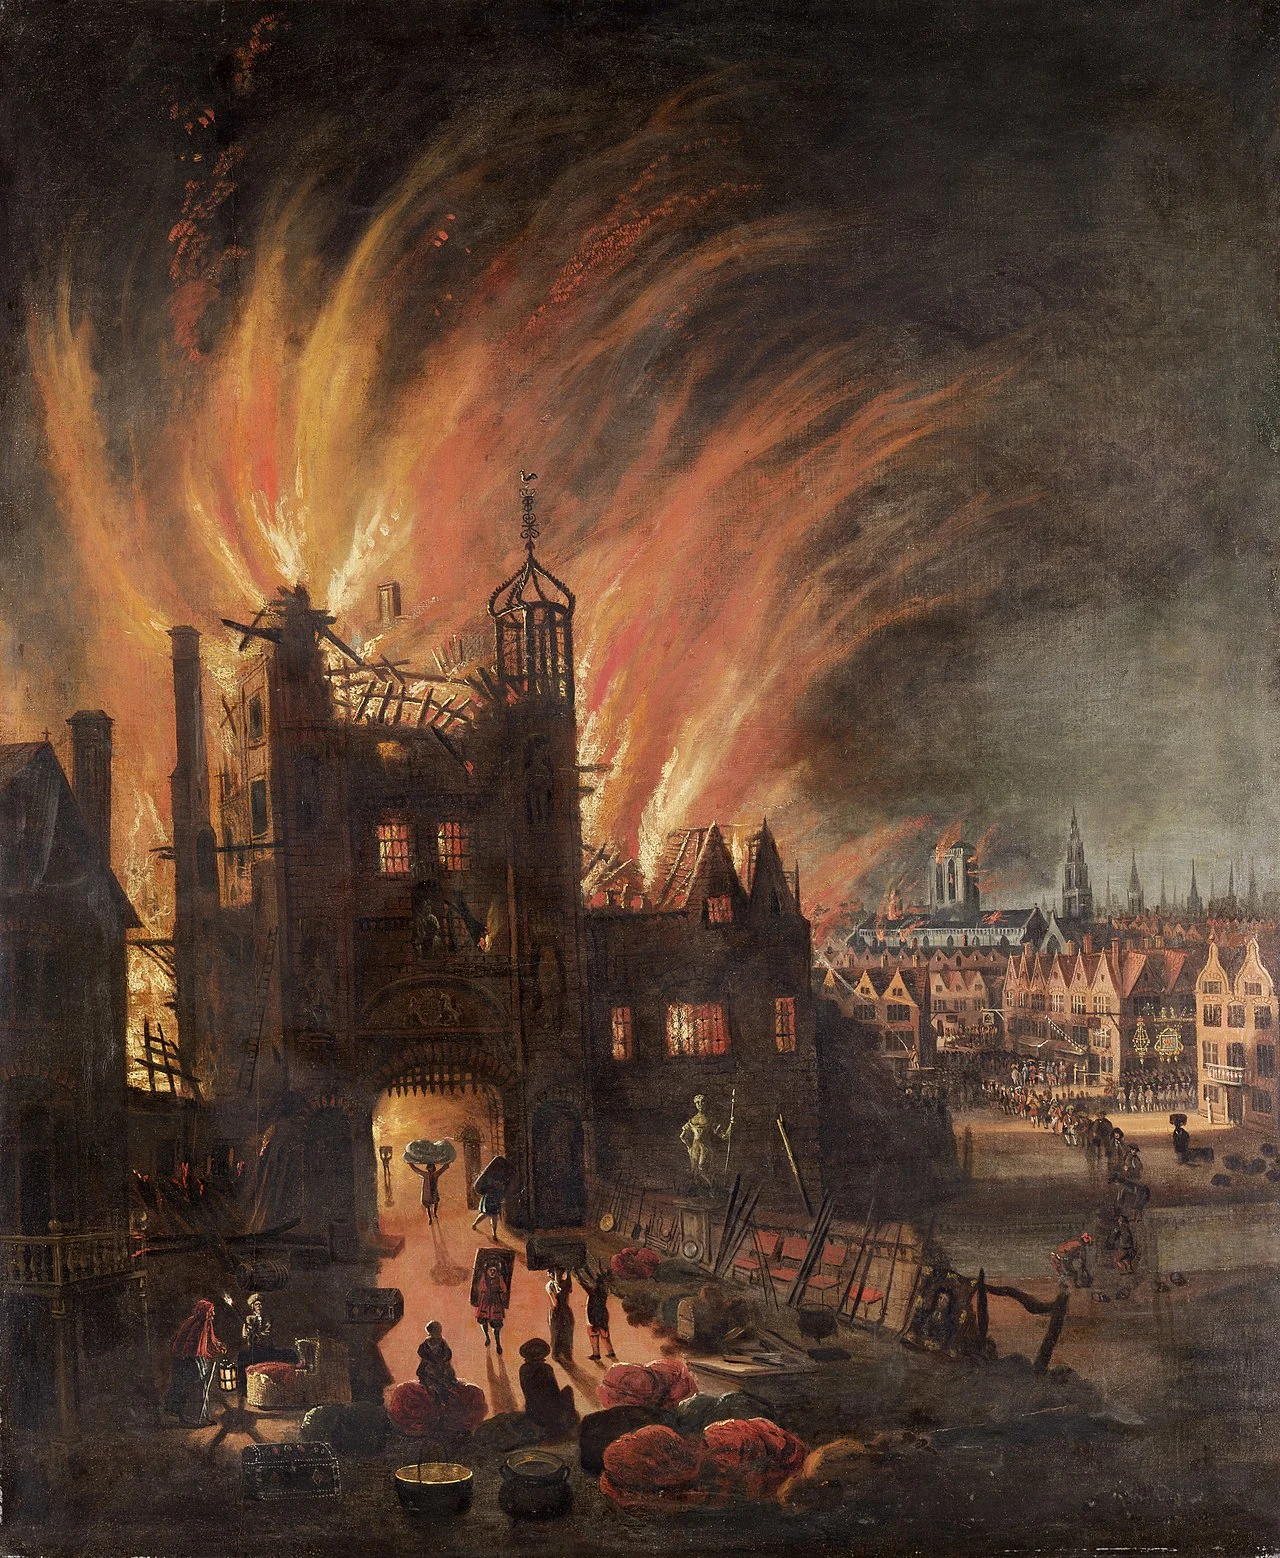 1280px-The Great Fire of London, with Ludgate and Old St. Paul's